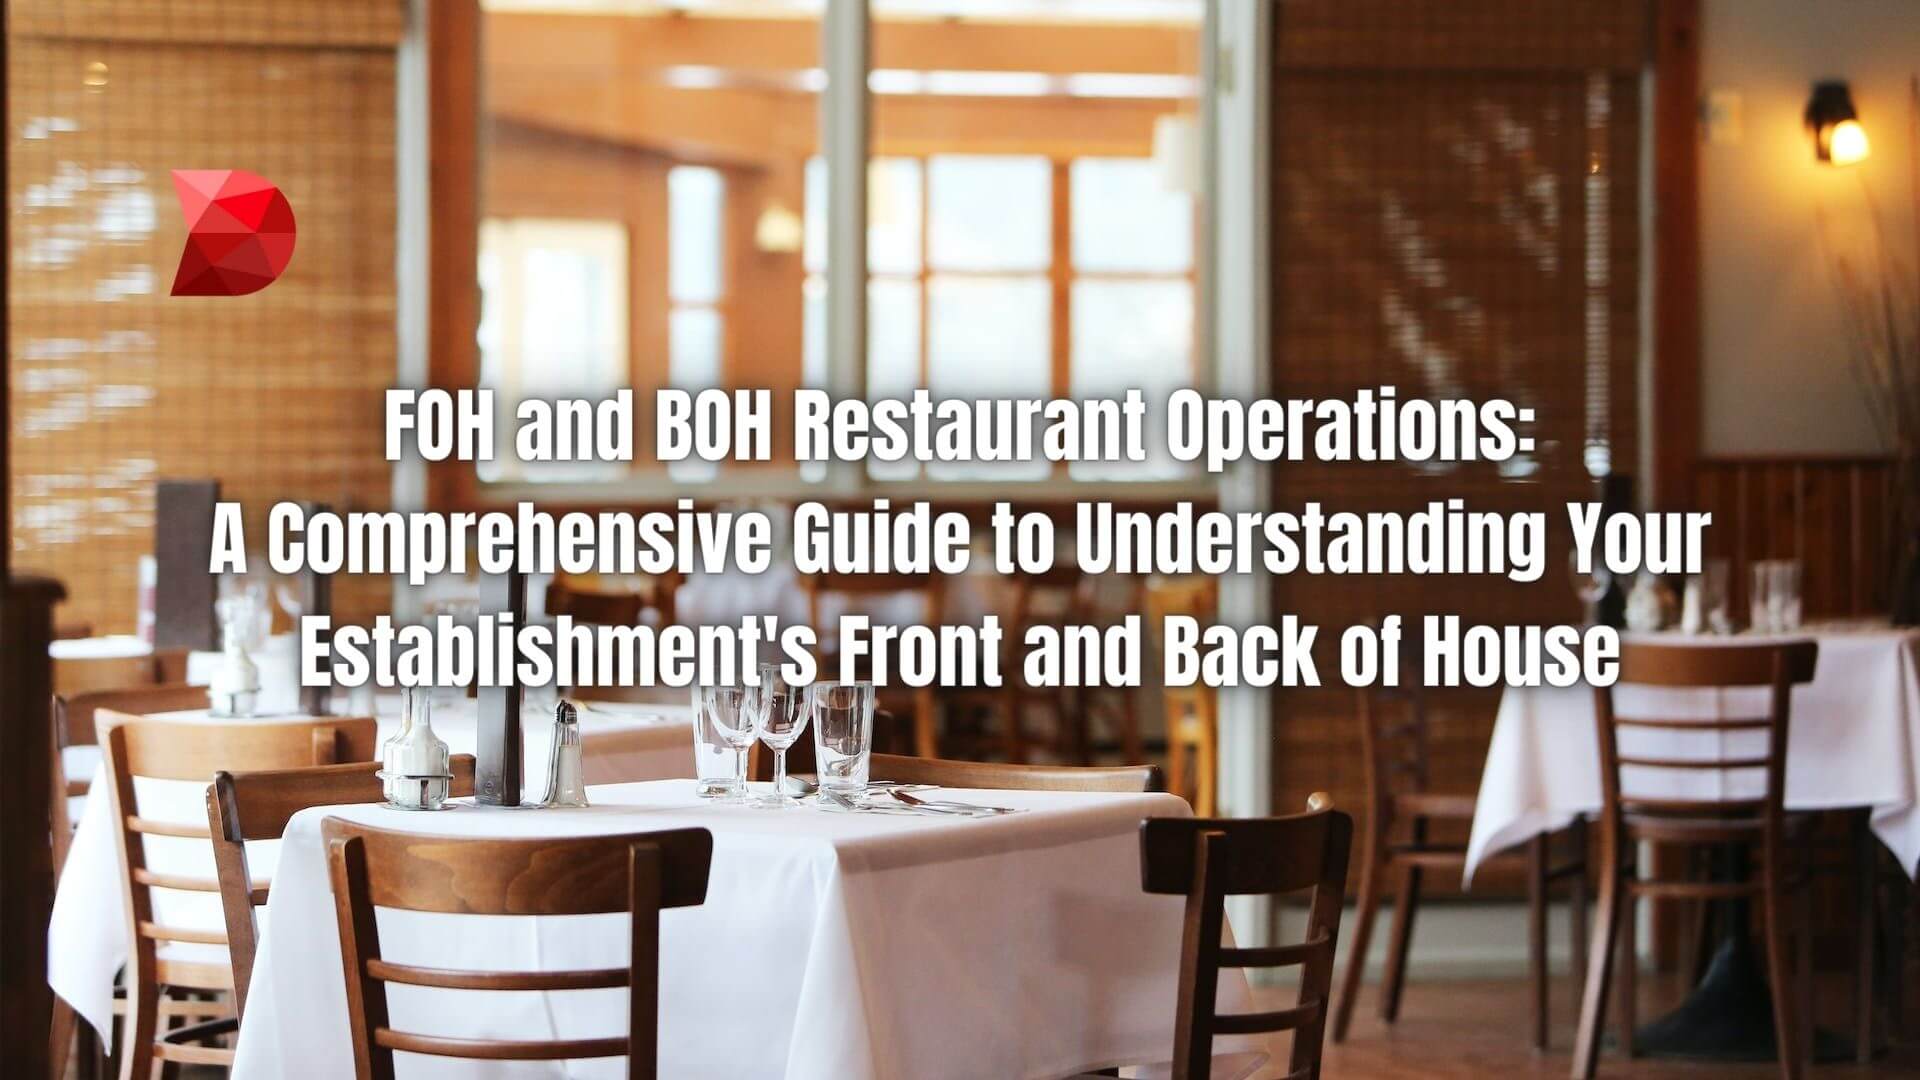 Master FOH and BOH restaurant operations with this comprehensive guide. Optimize service efficiency and elevate dining experiences!